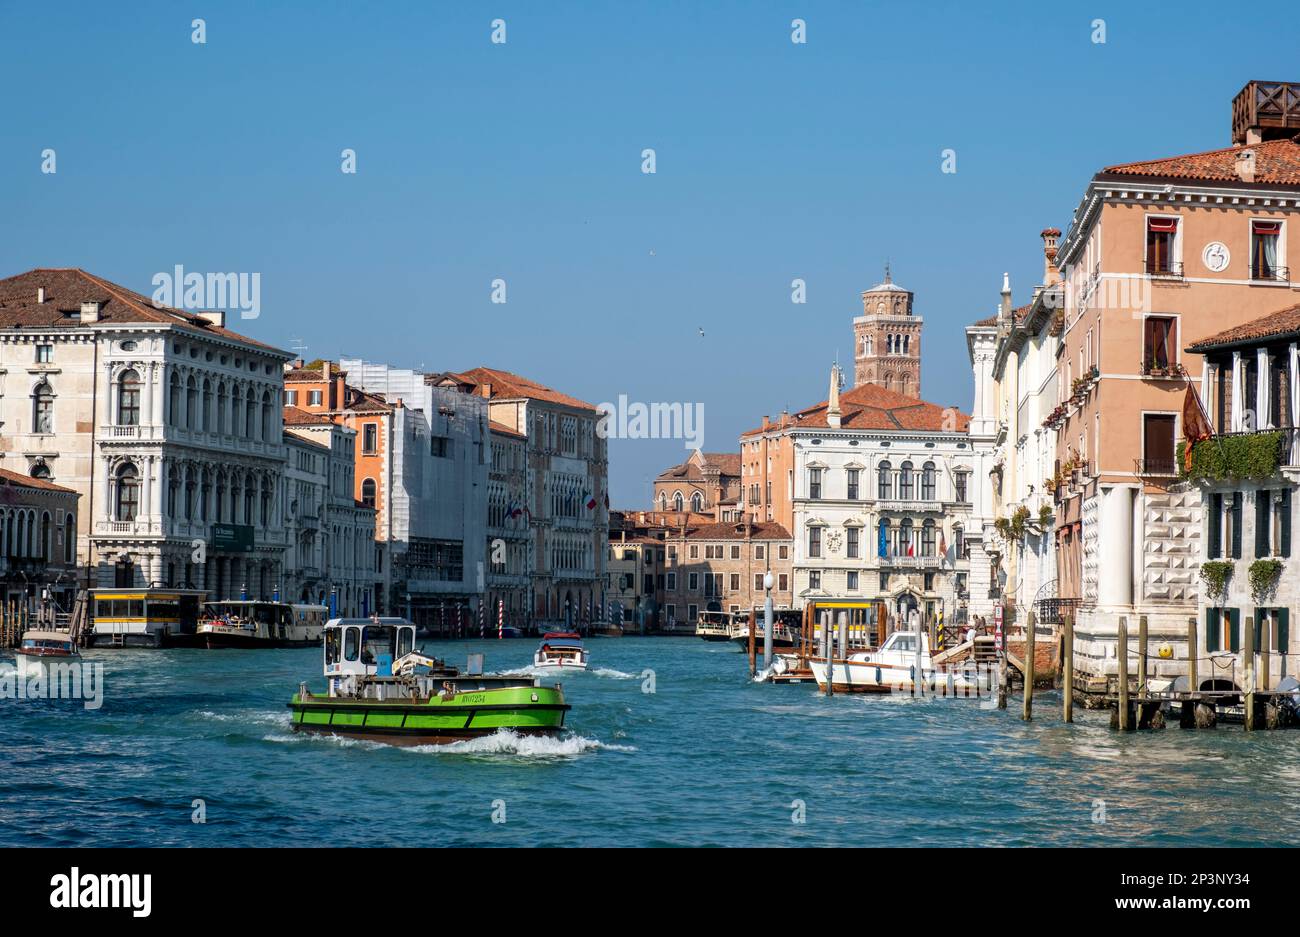 Canal traffic on the Grand Canal, Venice, Italy Stock Photo